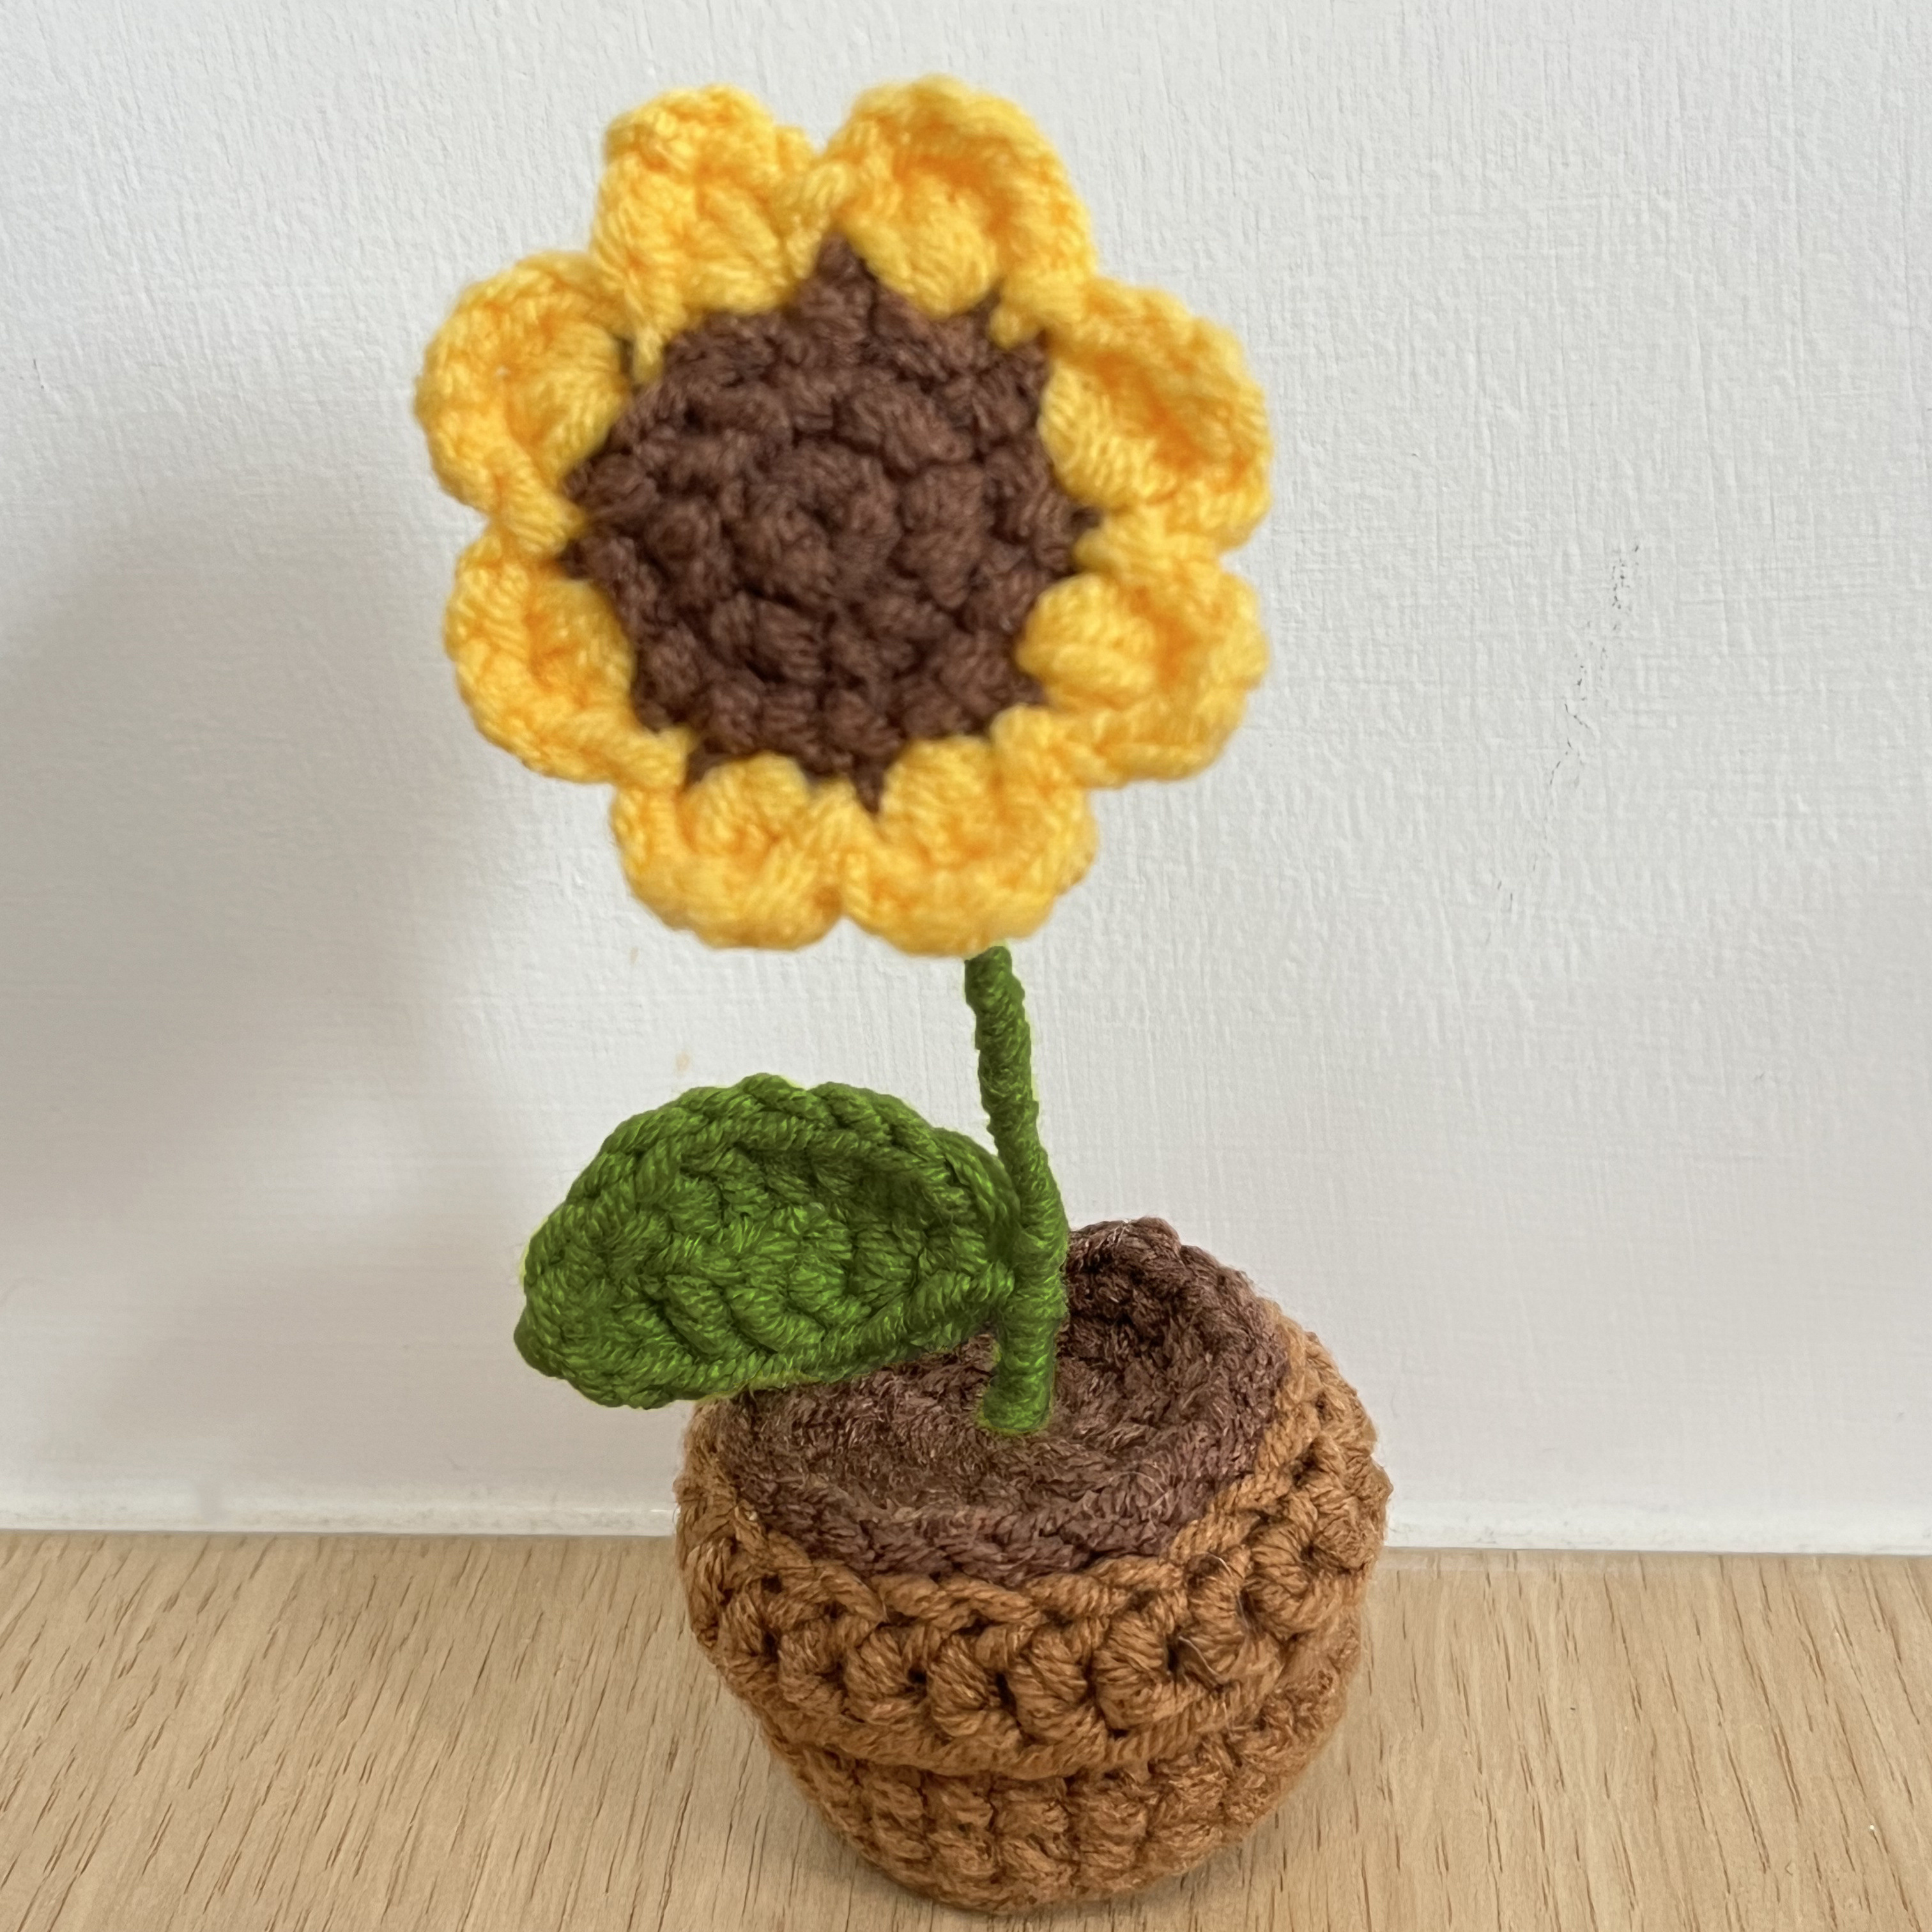 New Crochet Kit for Beginners, 6 Pcs Potted Flowers Crochet Kit, Crochet  Starter Knitting Kit for Complete Beginners with Step-by-Step Instructions